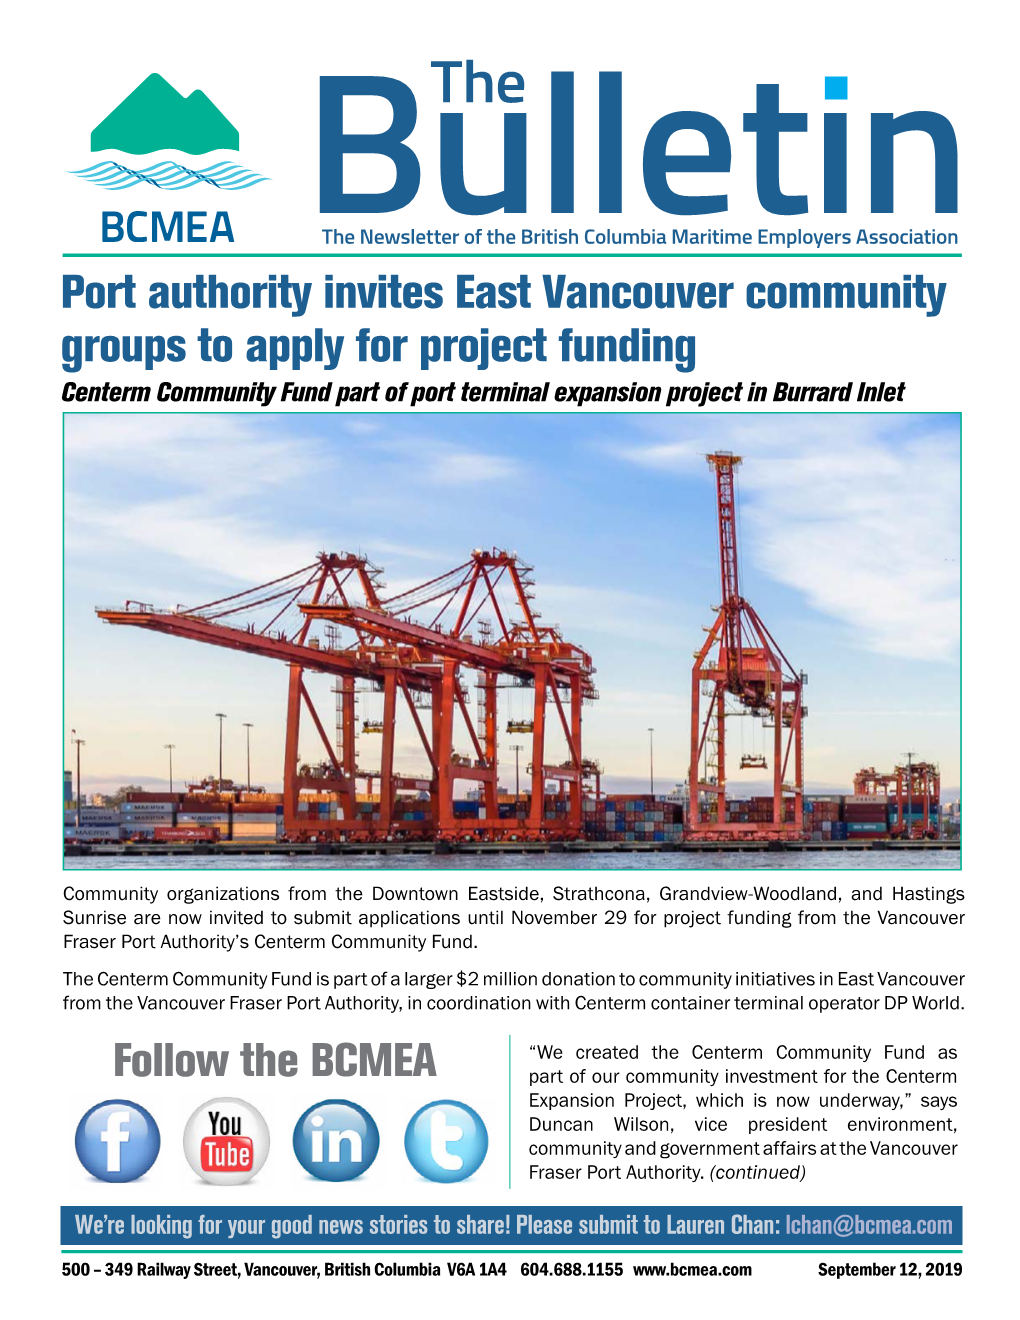 Follow the BCMEA Port Authority Invites East Vancouver Community